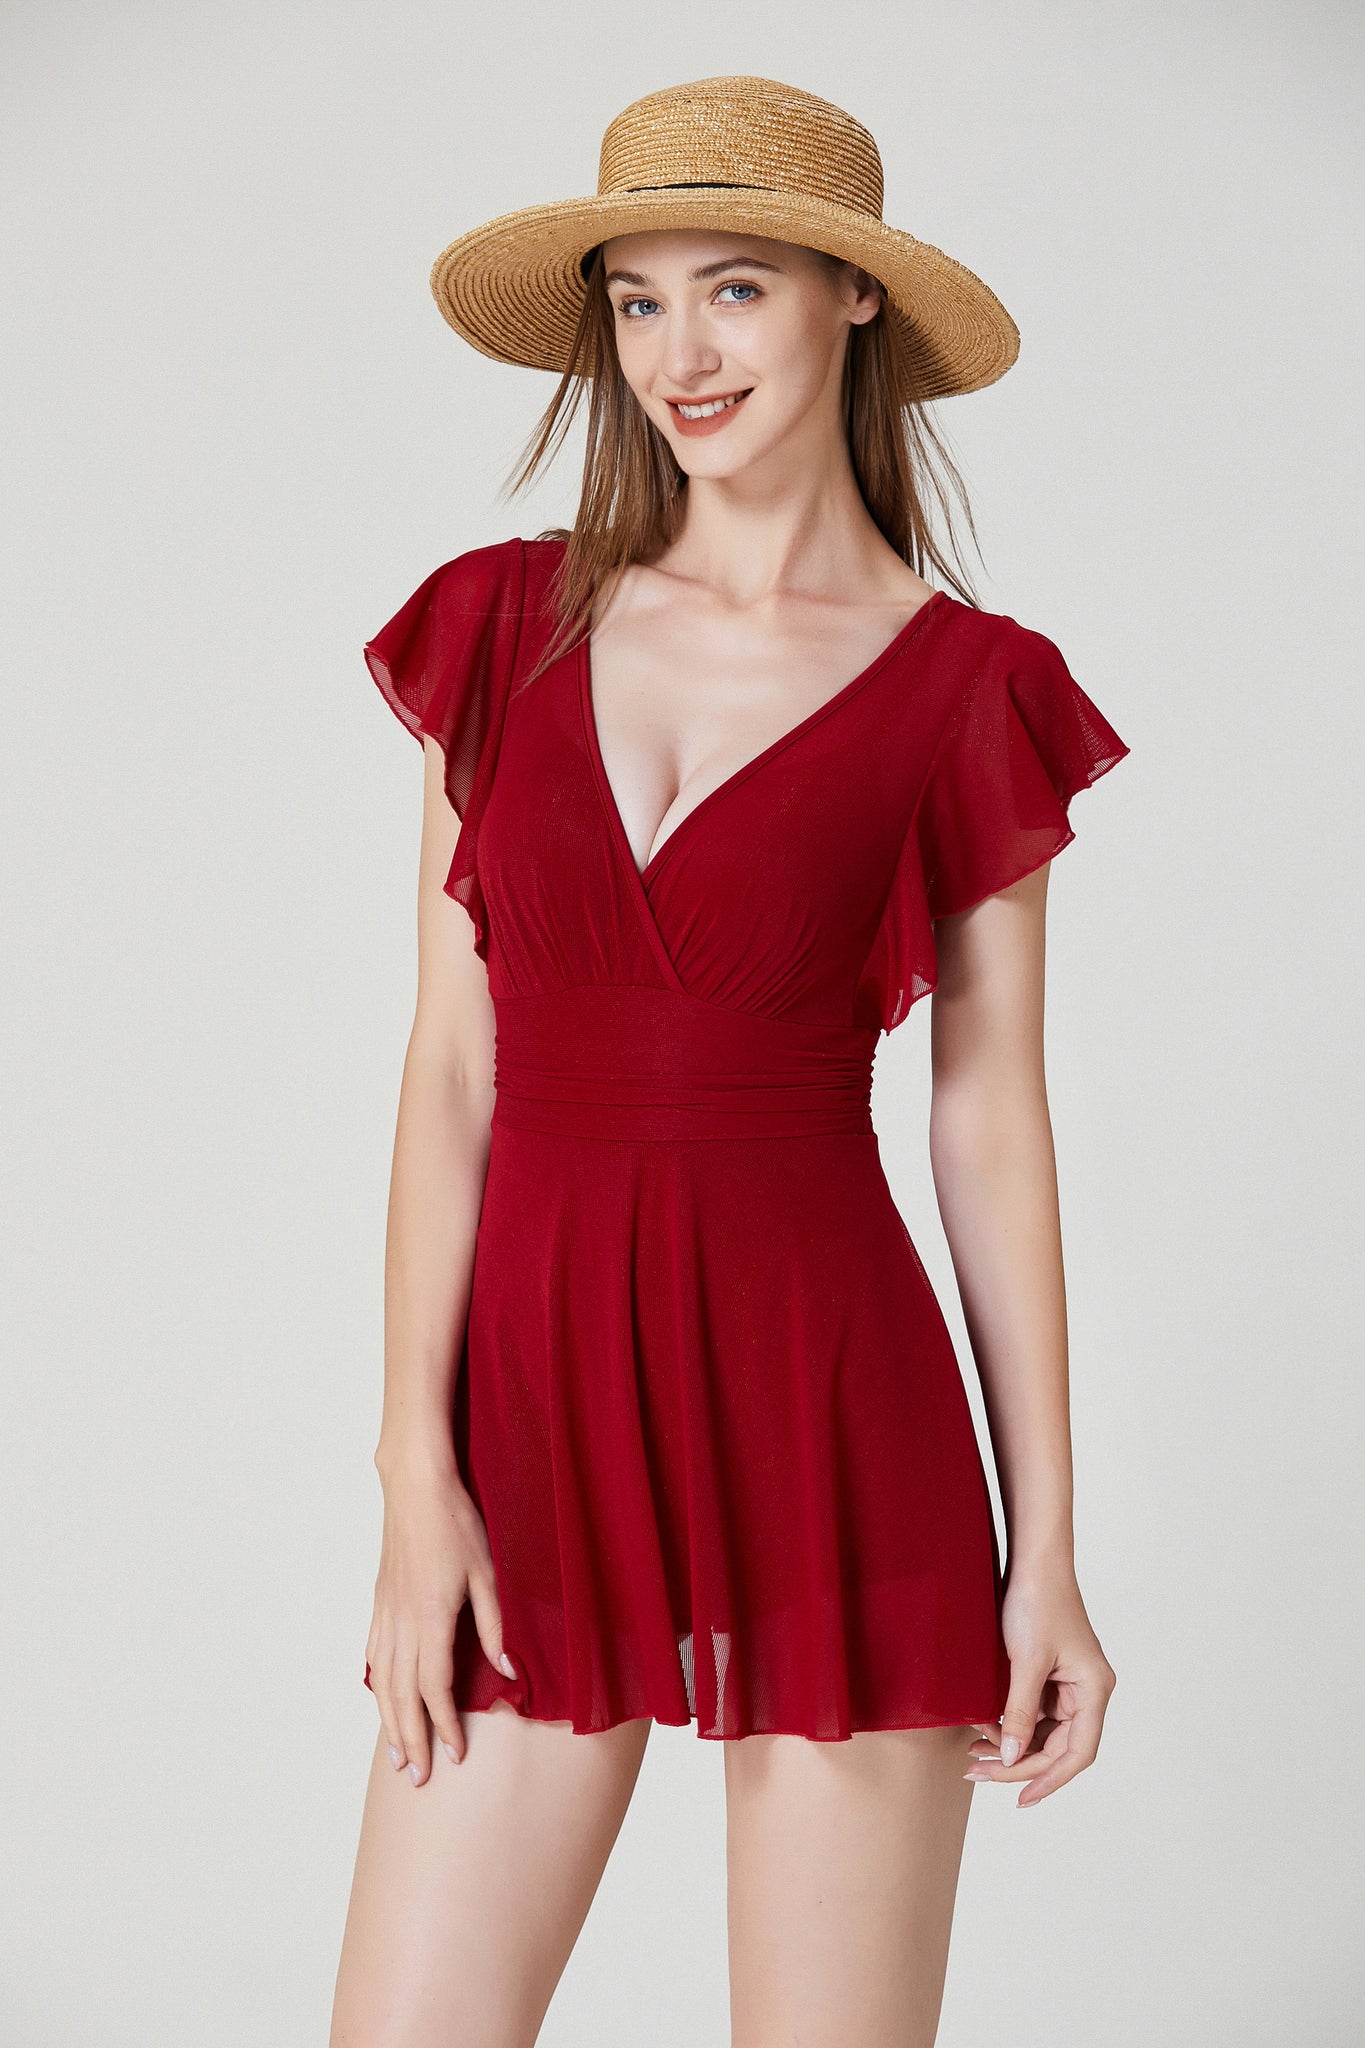 Sylphide | Giada Red One-Piece Swimsuit